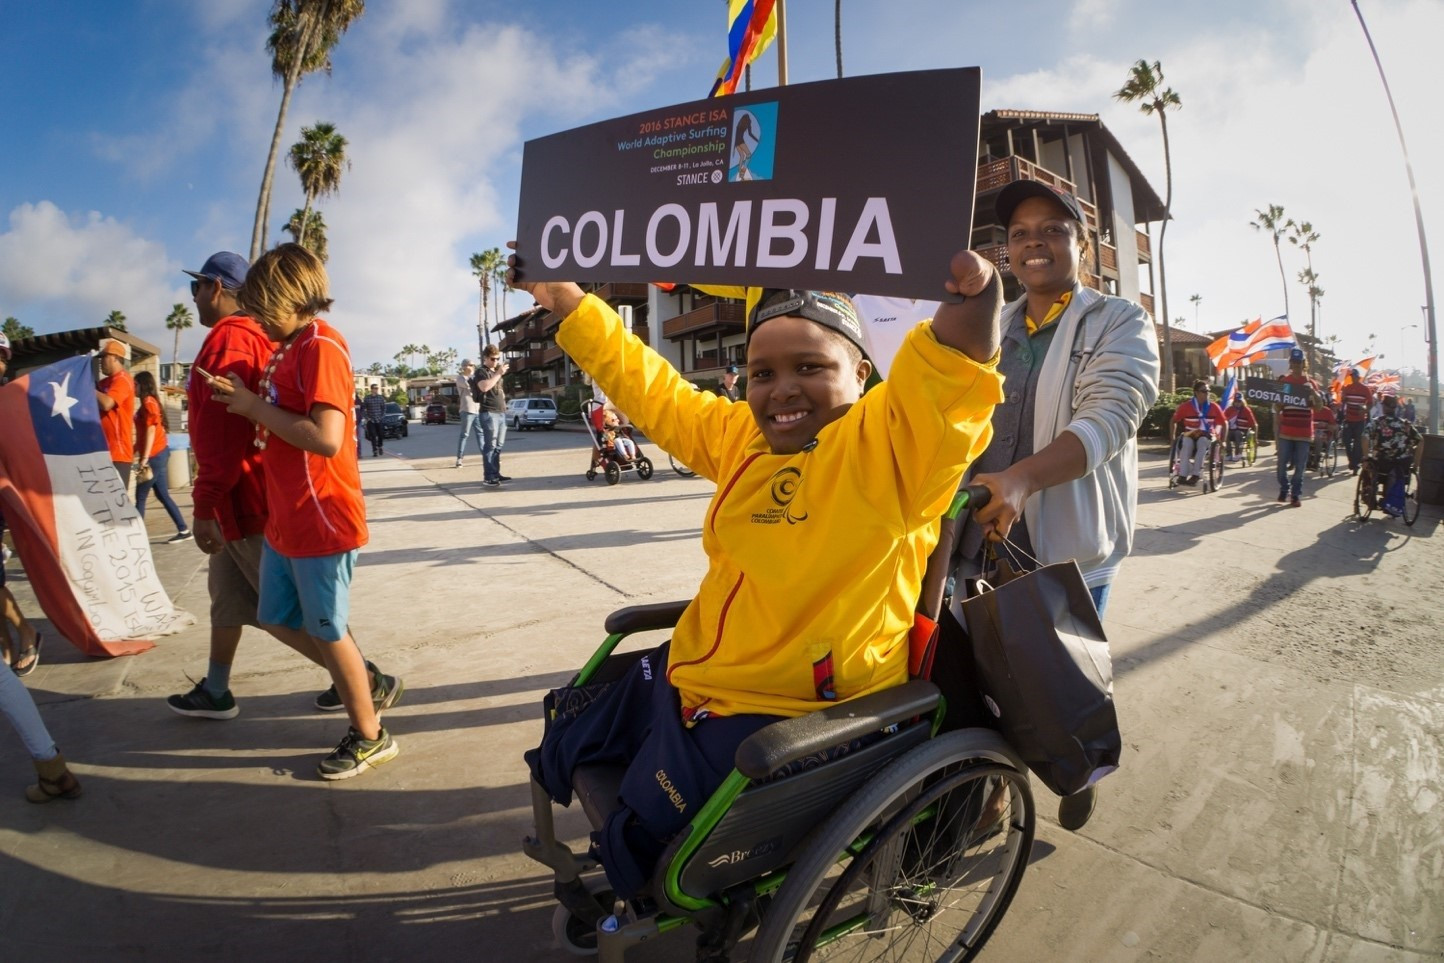 Colombia's adaptive surfer Freddy Marimón will benefit from the programme ©ISA